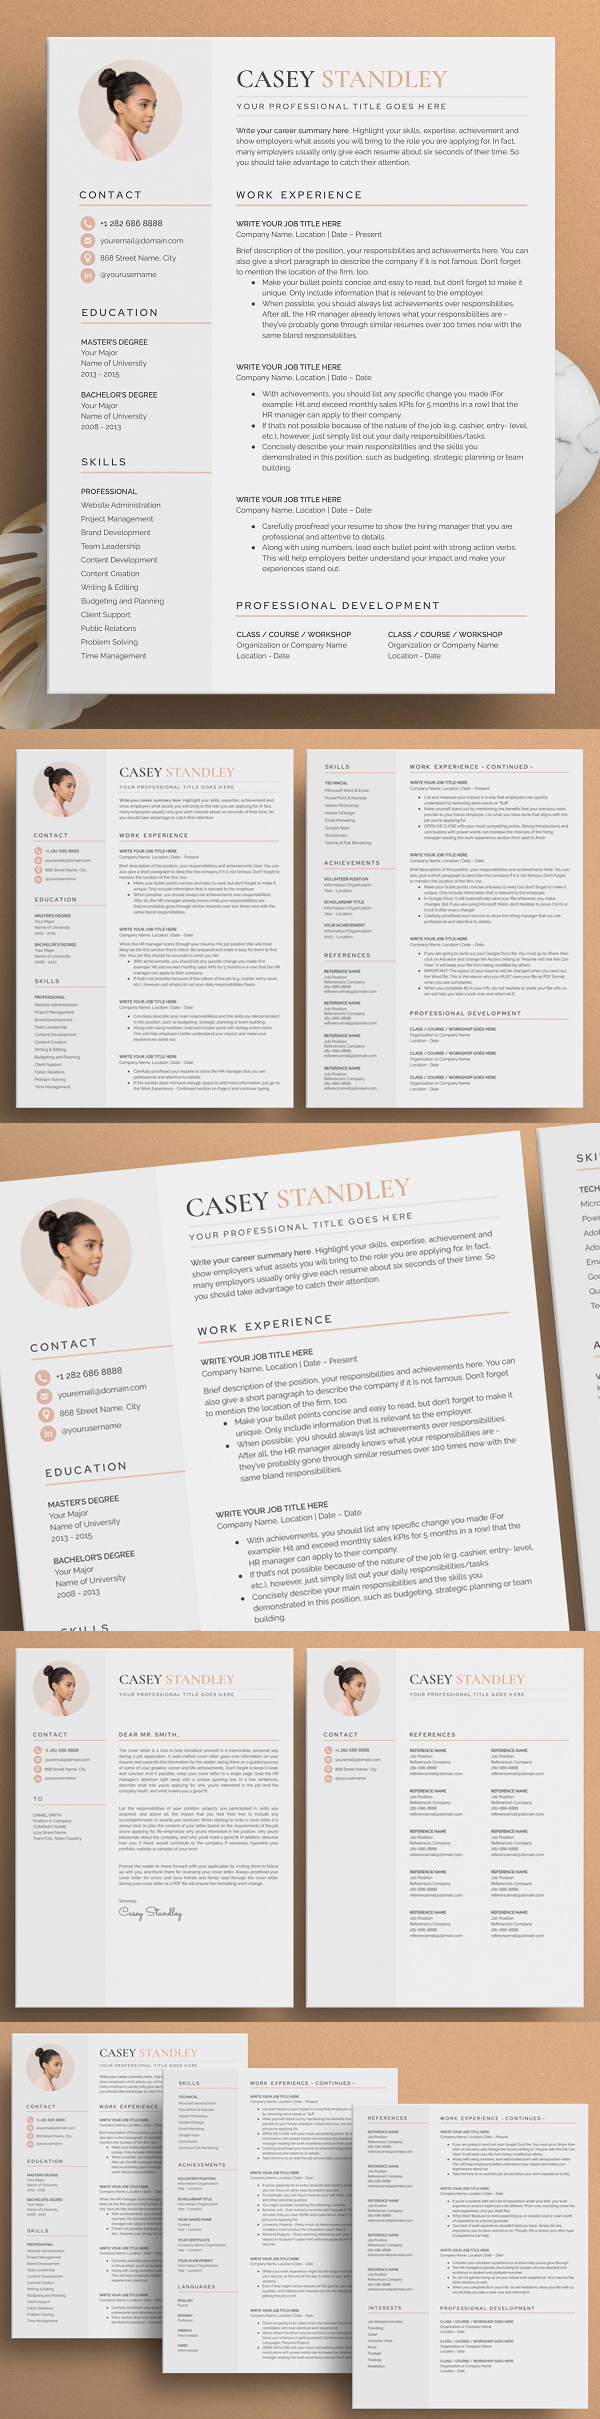 The Standley Resume Template